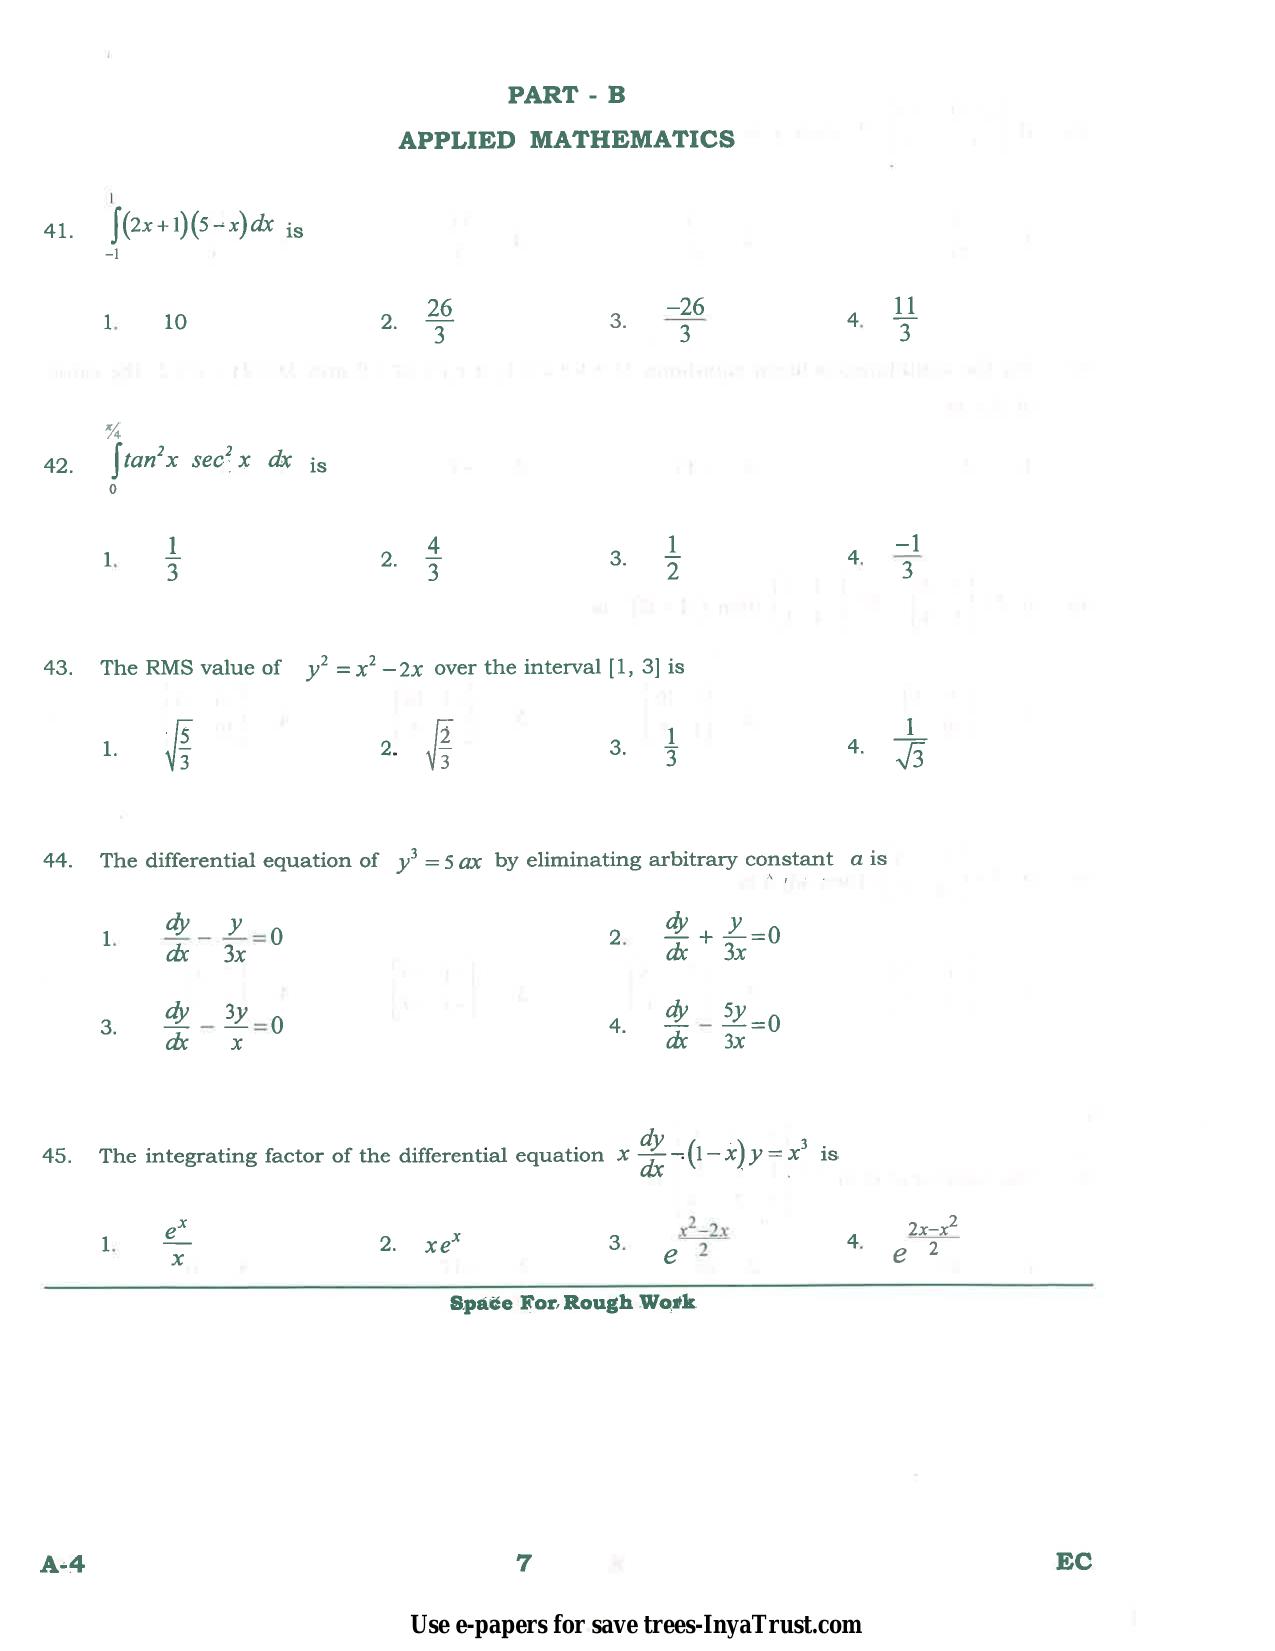 Karnataka Diploma CET- 2015 Electronics and Communication Engineering Question Paper - Page 7